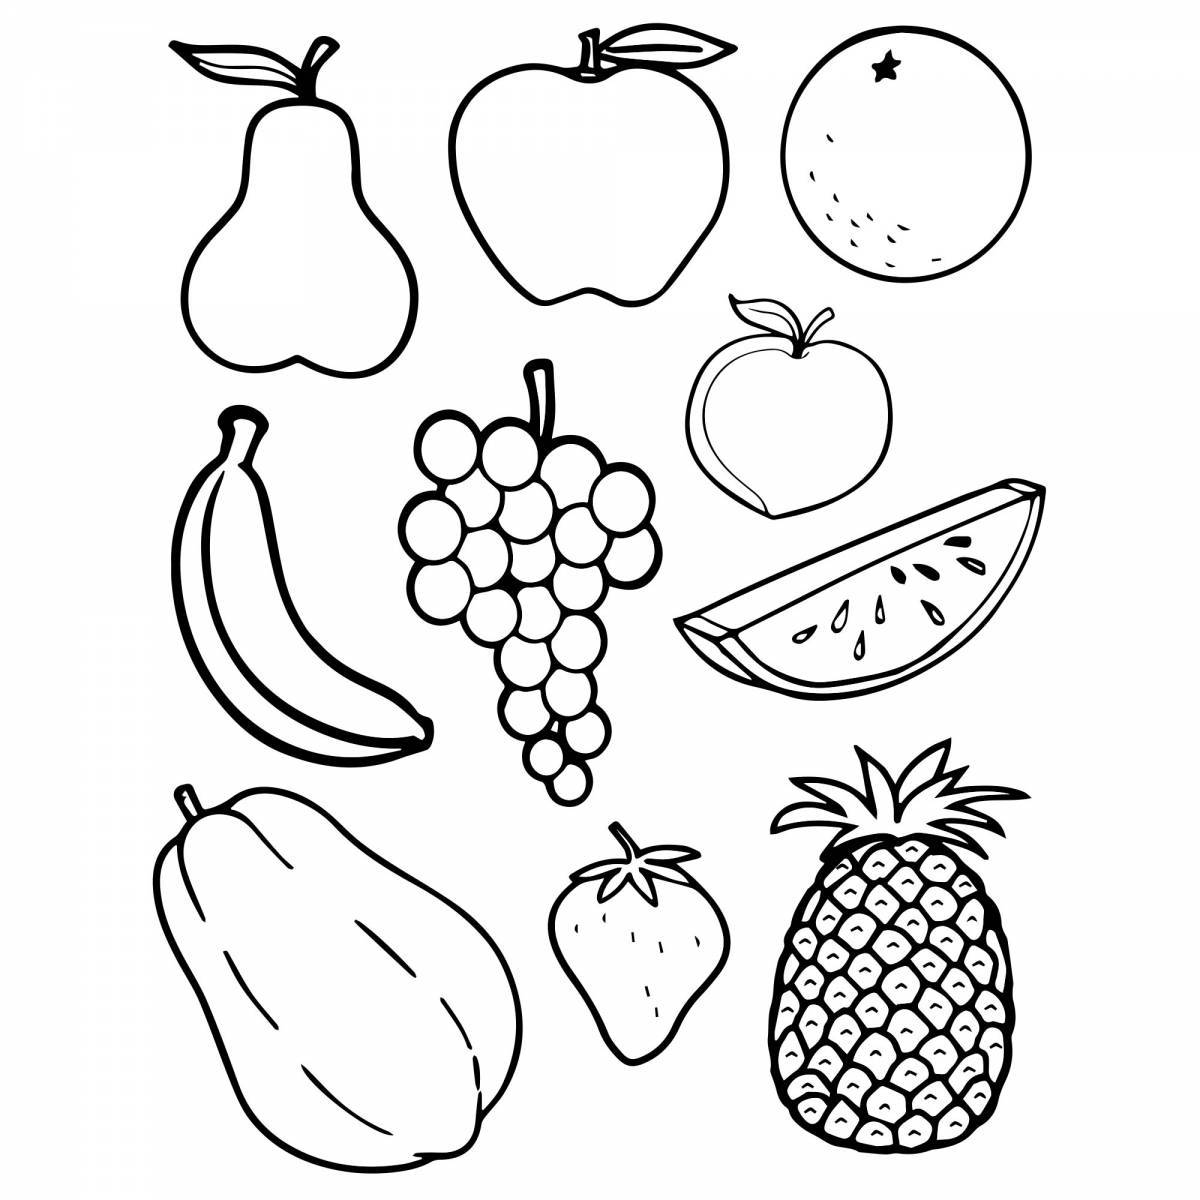 Colorful fruit coloring book for 3-4 year olds